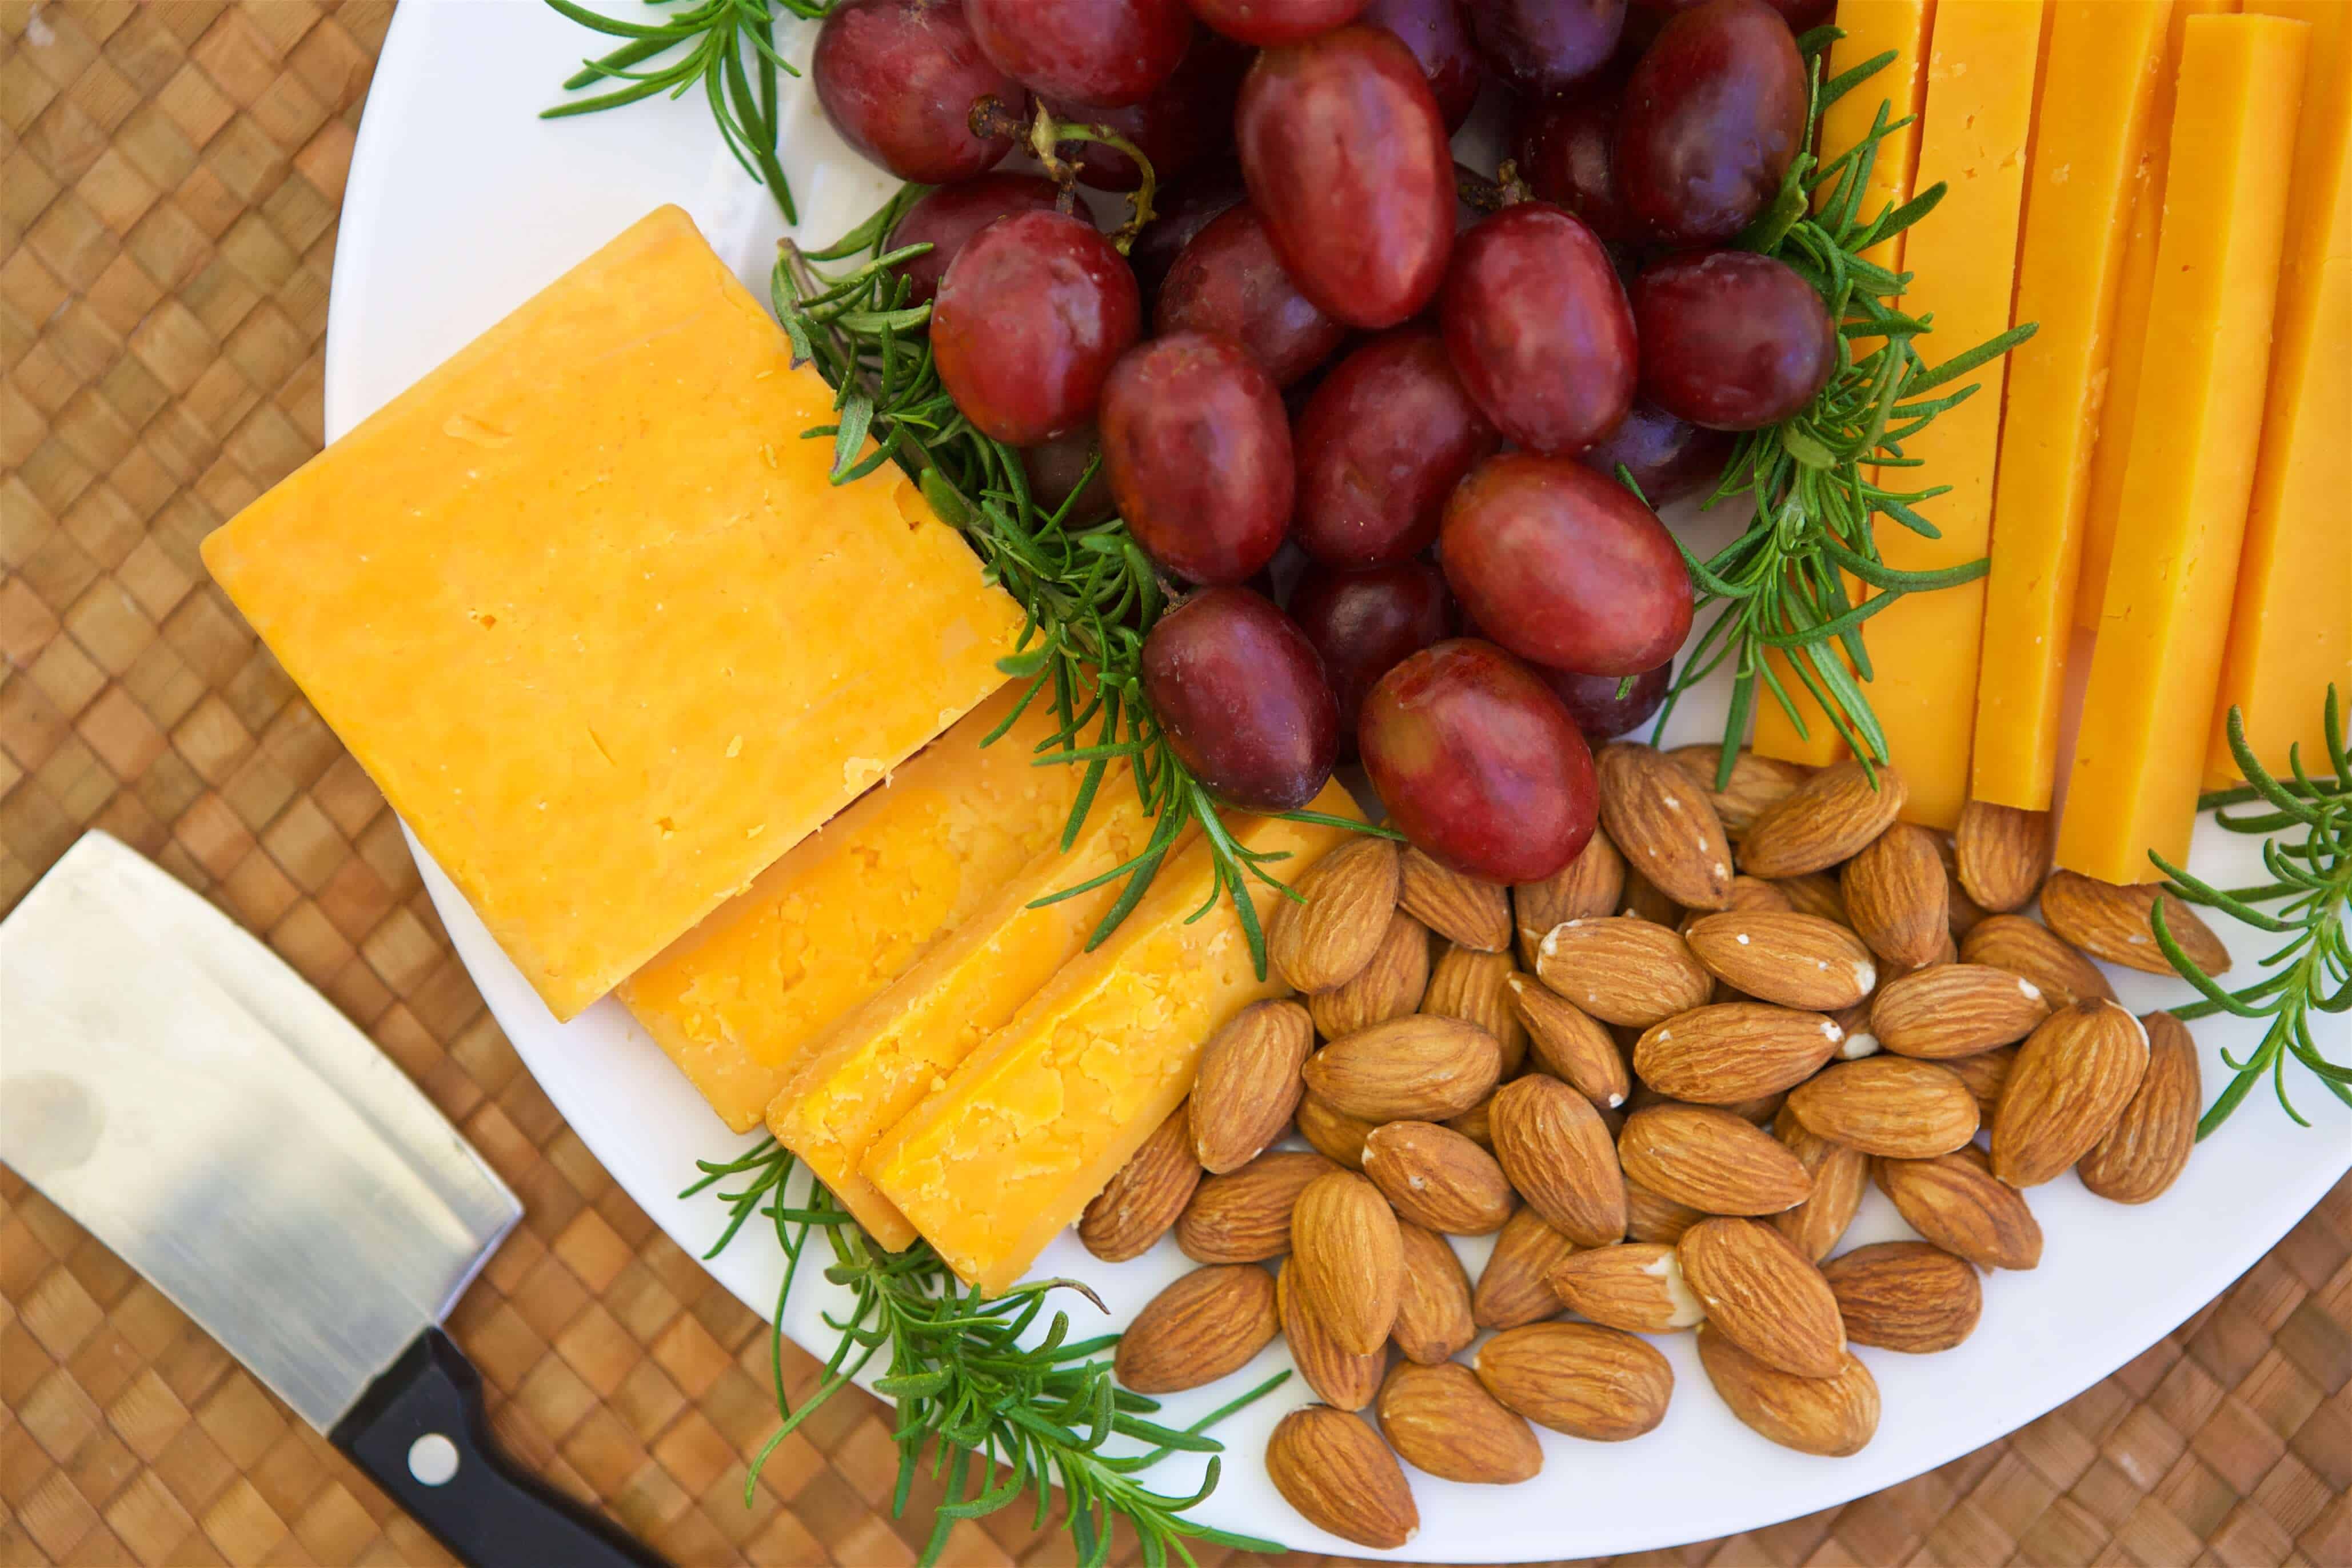 grapes, cheese, and almonds as an easy appetizer